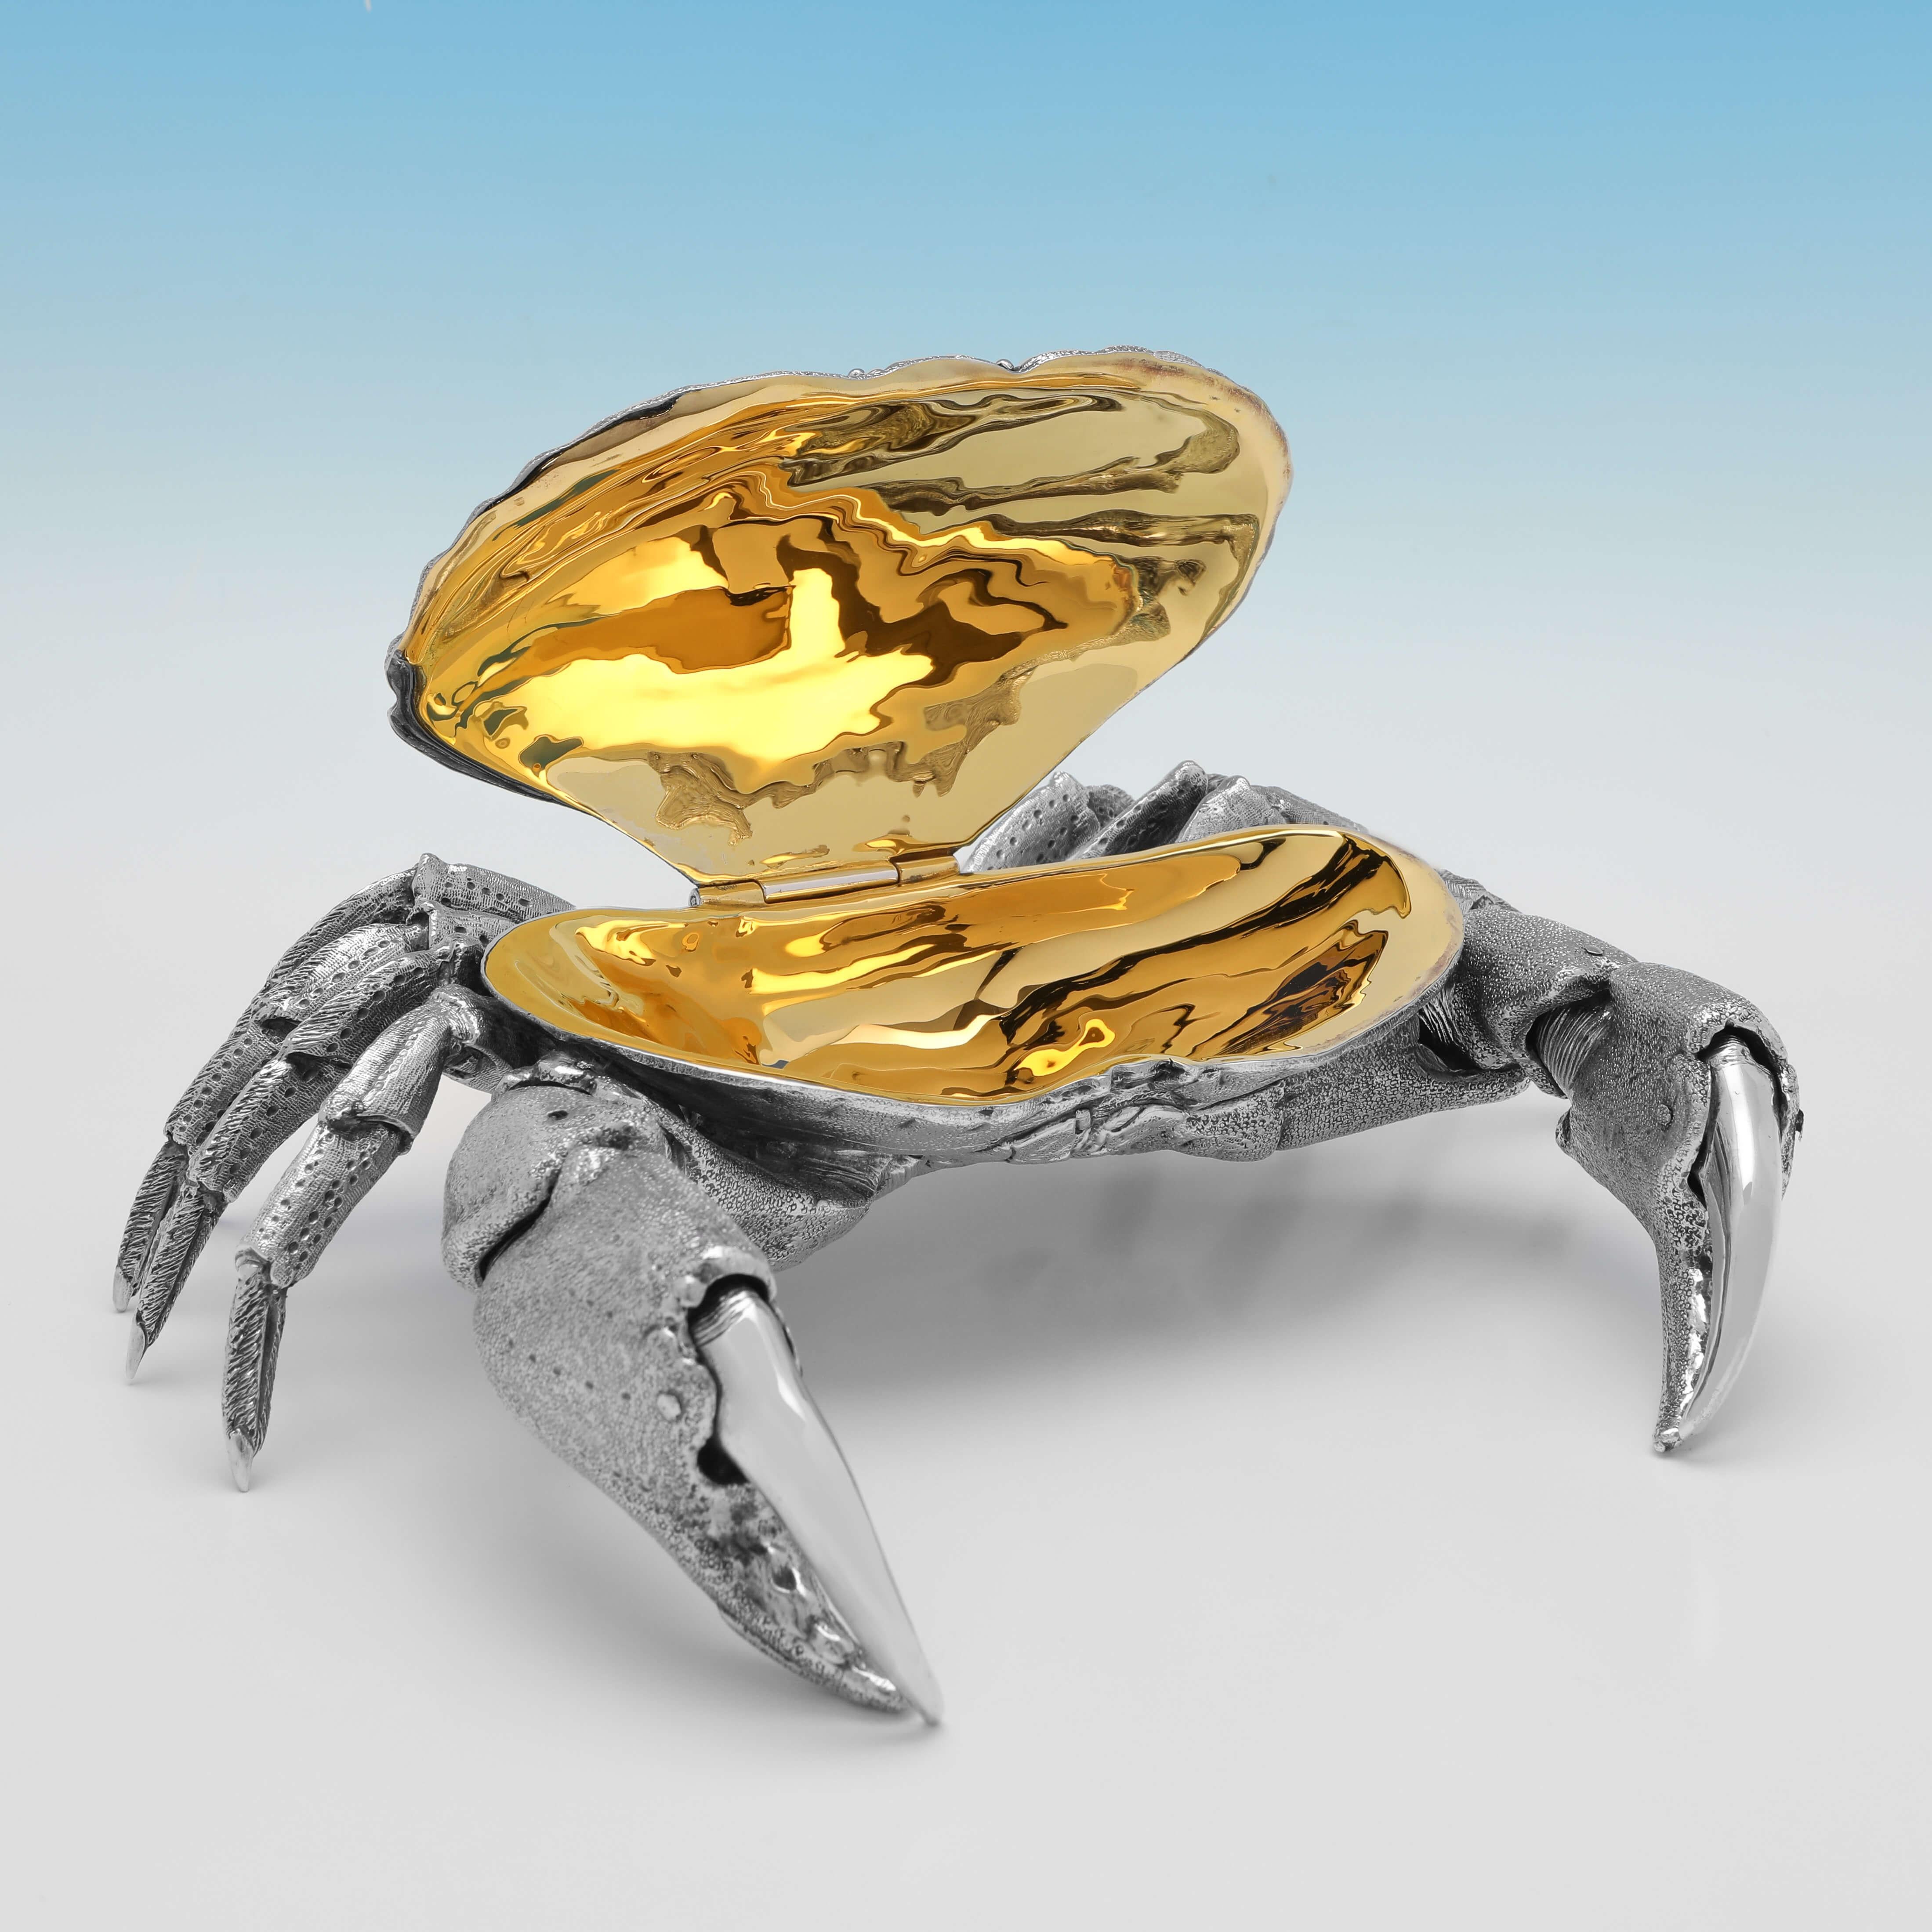 Hallmarked in London in 2007 by William Comyns, this stunning and very realistic, sterling silver model of a crab, has a hinged shell with a gilt interior to be used to serve crab meat, and also features very lifelike movable pincers. 

The crab